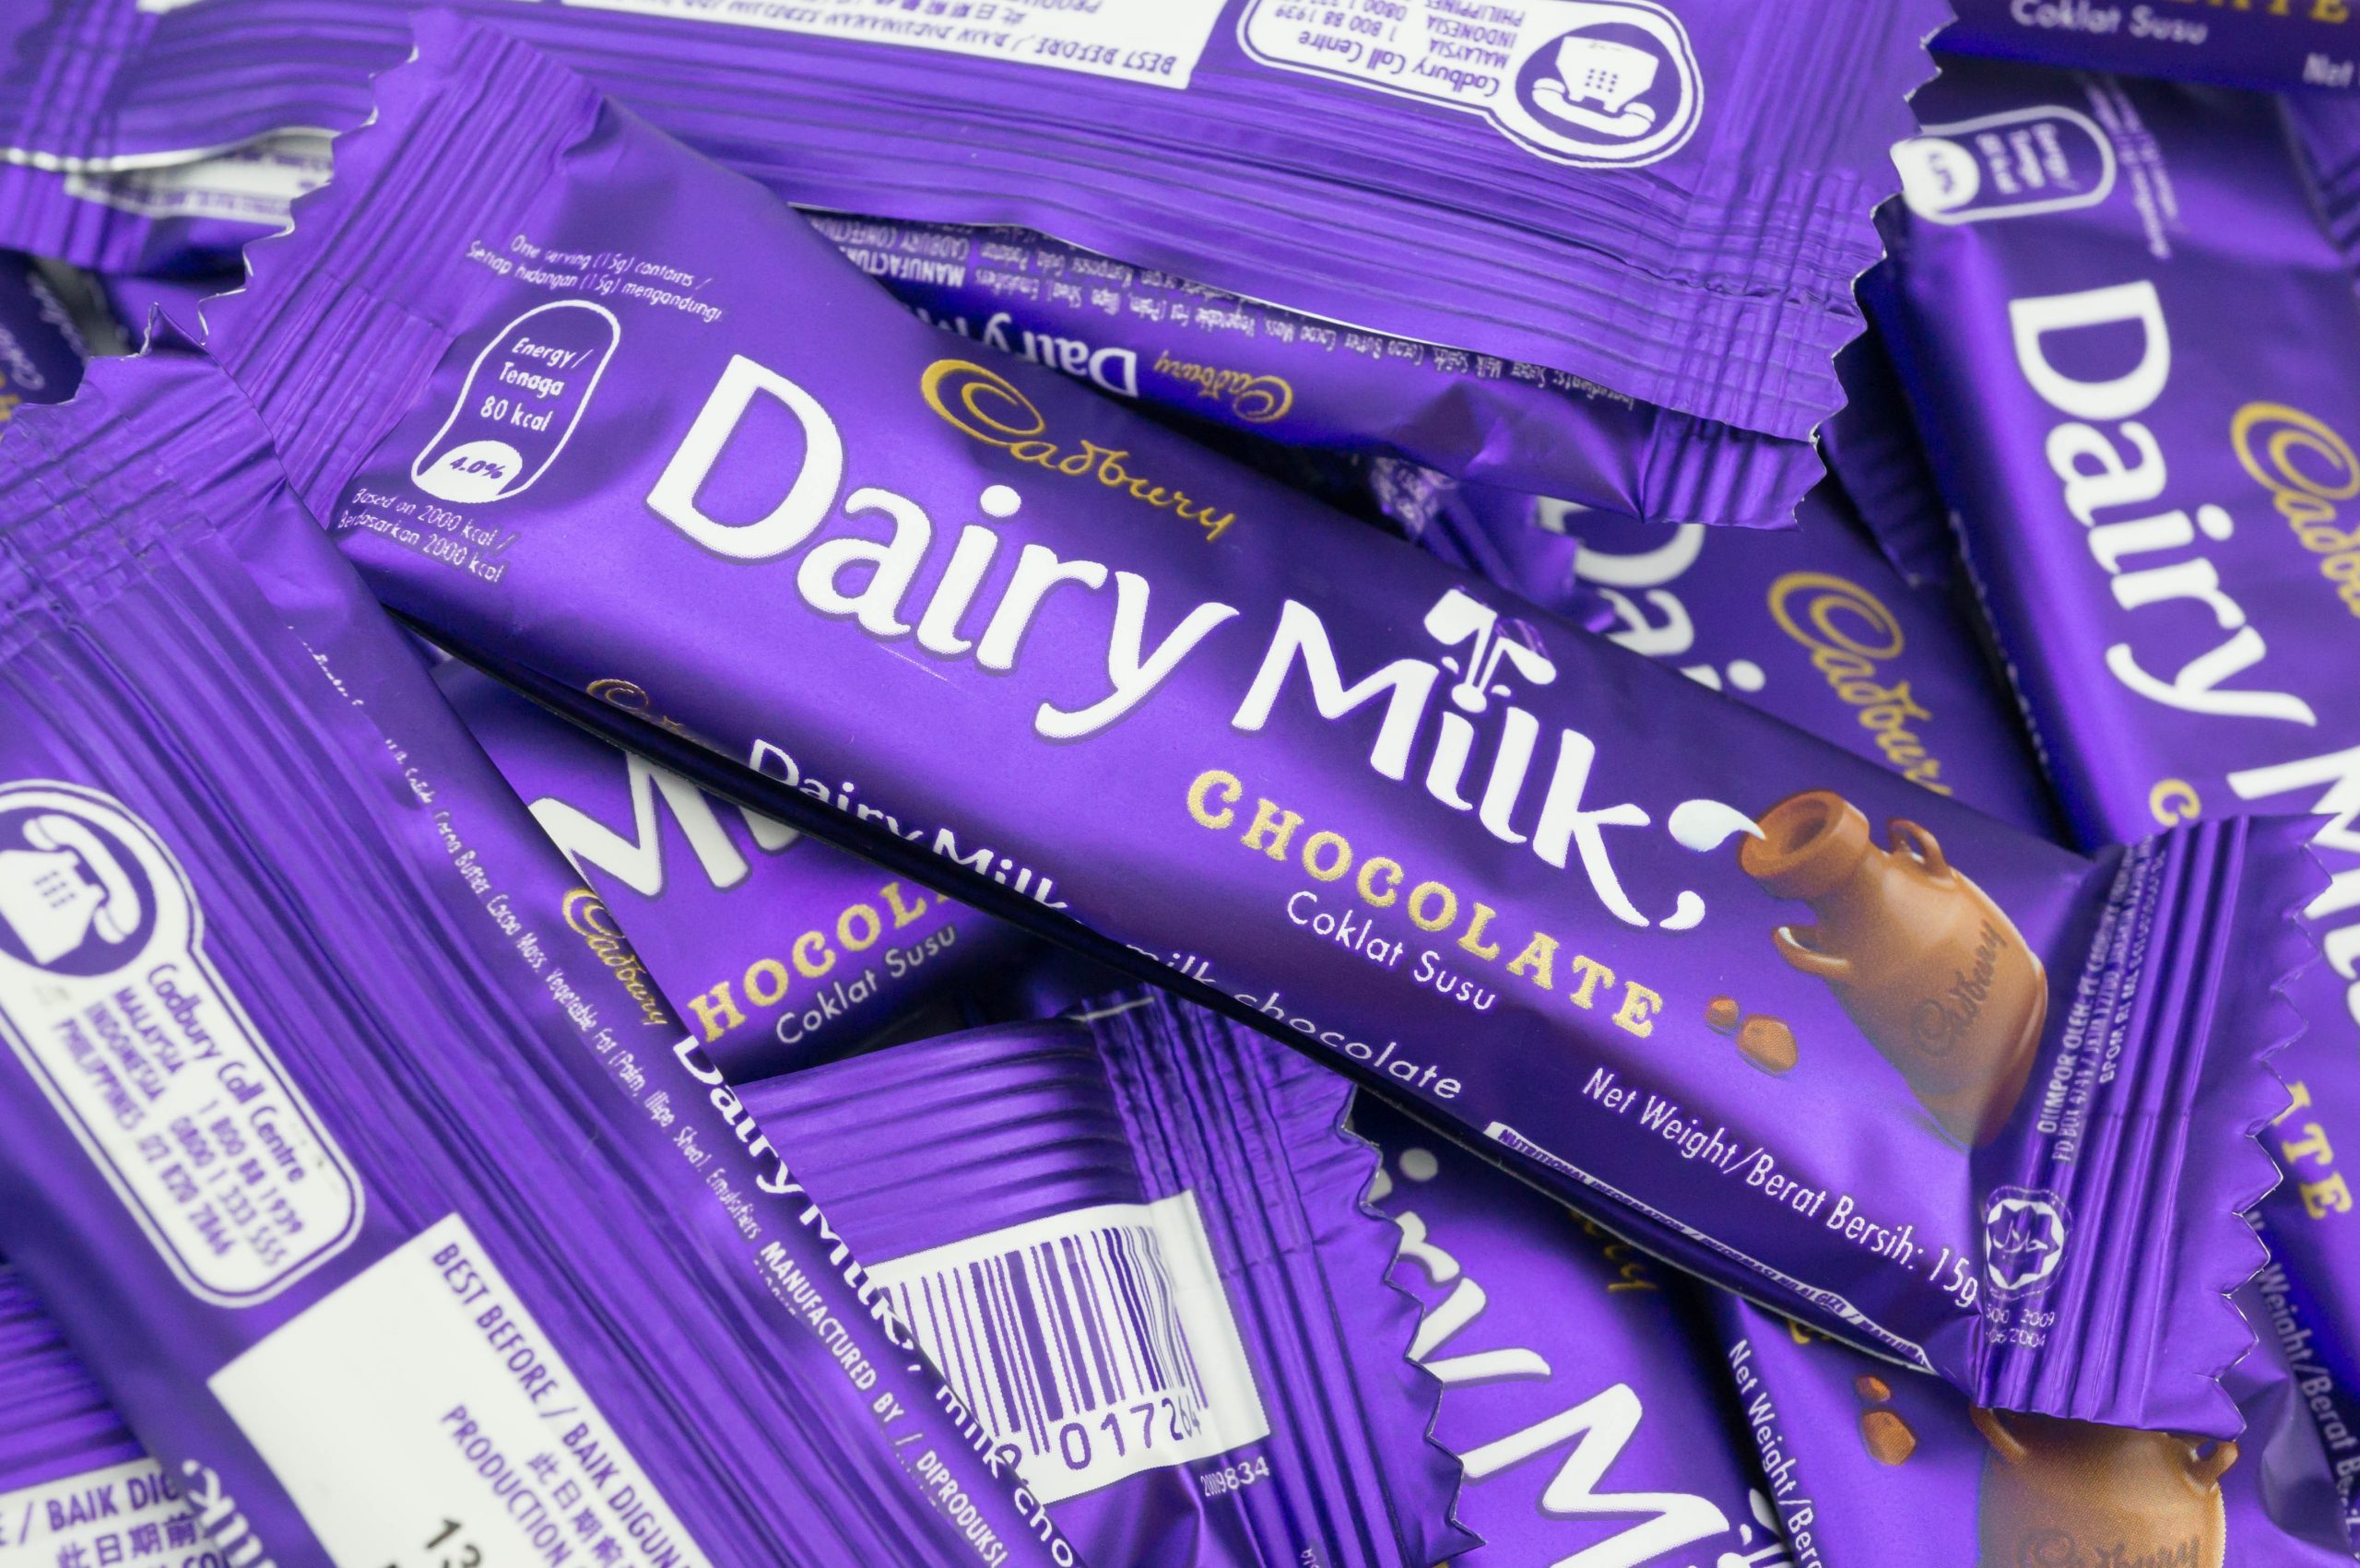 <p>Both Alexis Kelly, a travel editor at <em>Fodors</em>, and Paul Eisenberg of TravelingDad.com agree that Cadbury chocolates are a prime duty-free shopping target when traveling internationally, because they're:</p> <ul> <li>Not available in the U.S.</li> <li class="">More delicious than American chocolate</li> </ul> <p>Cadbury in the United States has been different from the United Kingdom version since 2015, so passing up the chance to bring some home would qualify as a <a href="https://www.rd.com/list/travel-tips-avoid-mistakes/">travel mistake you should avoid</a>.</p>